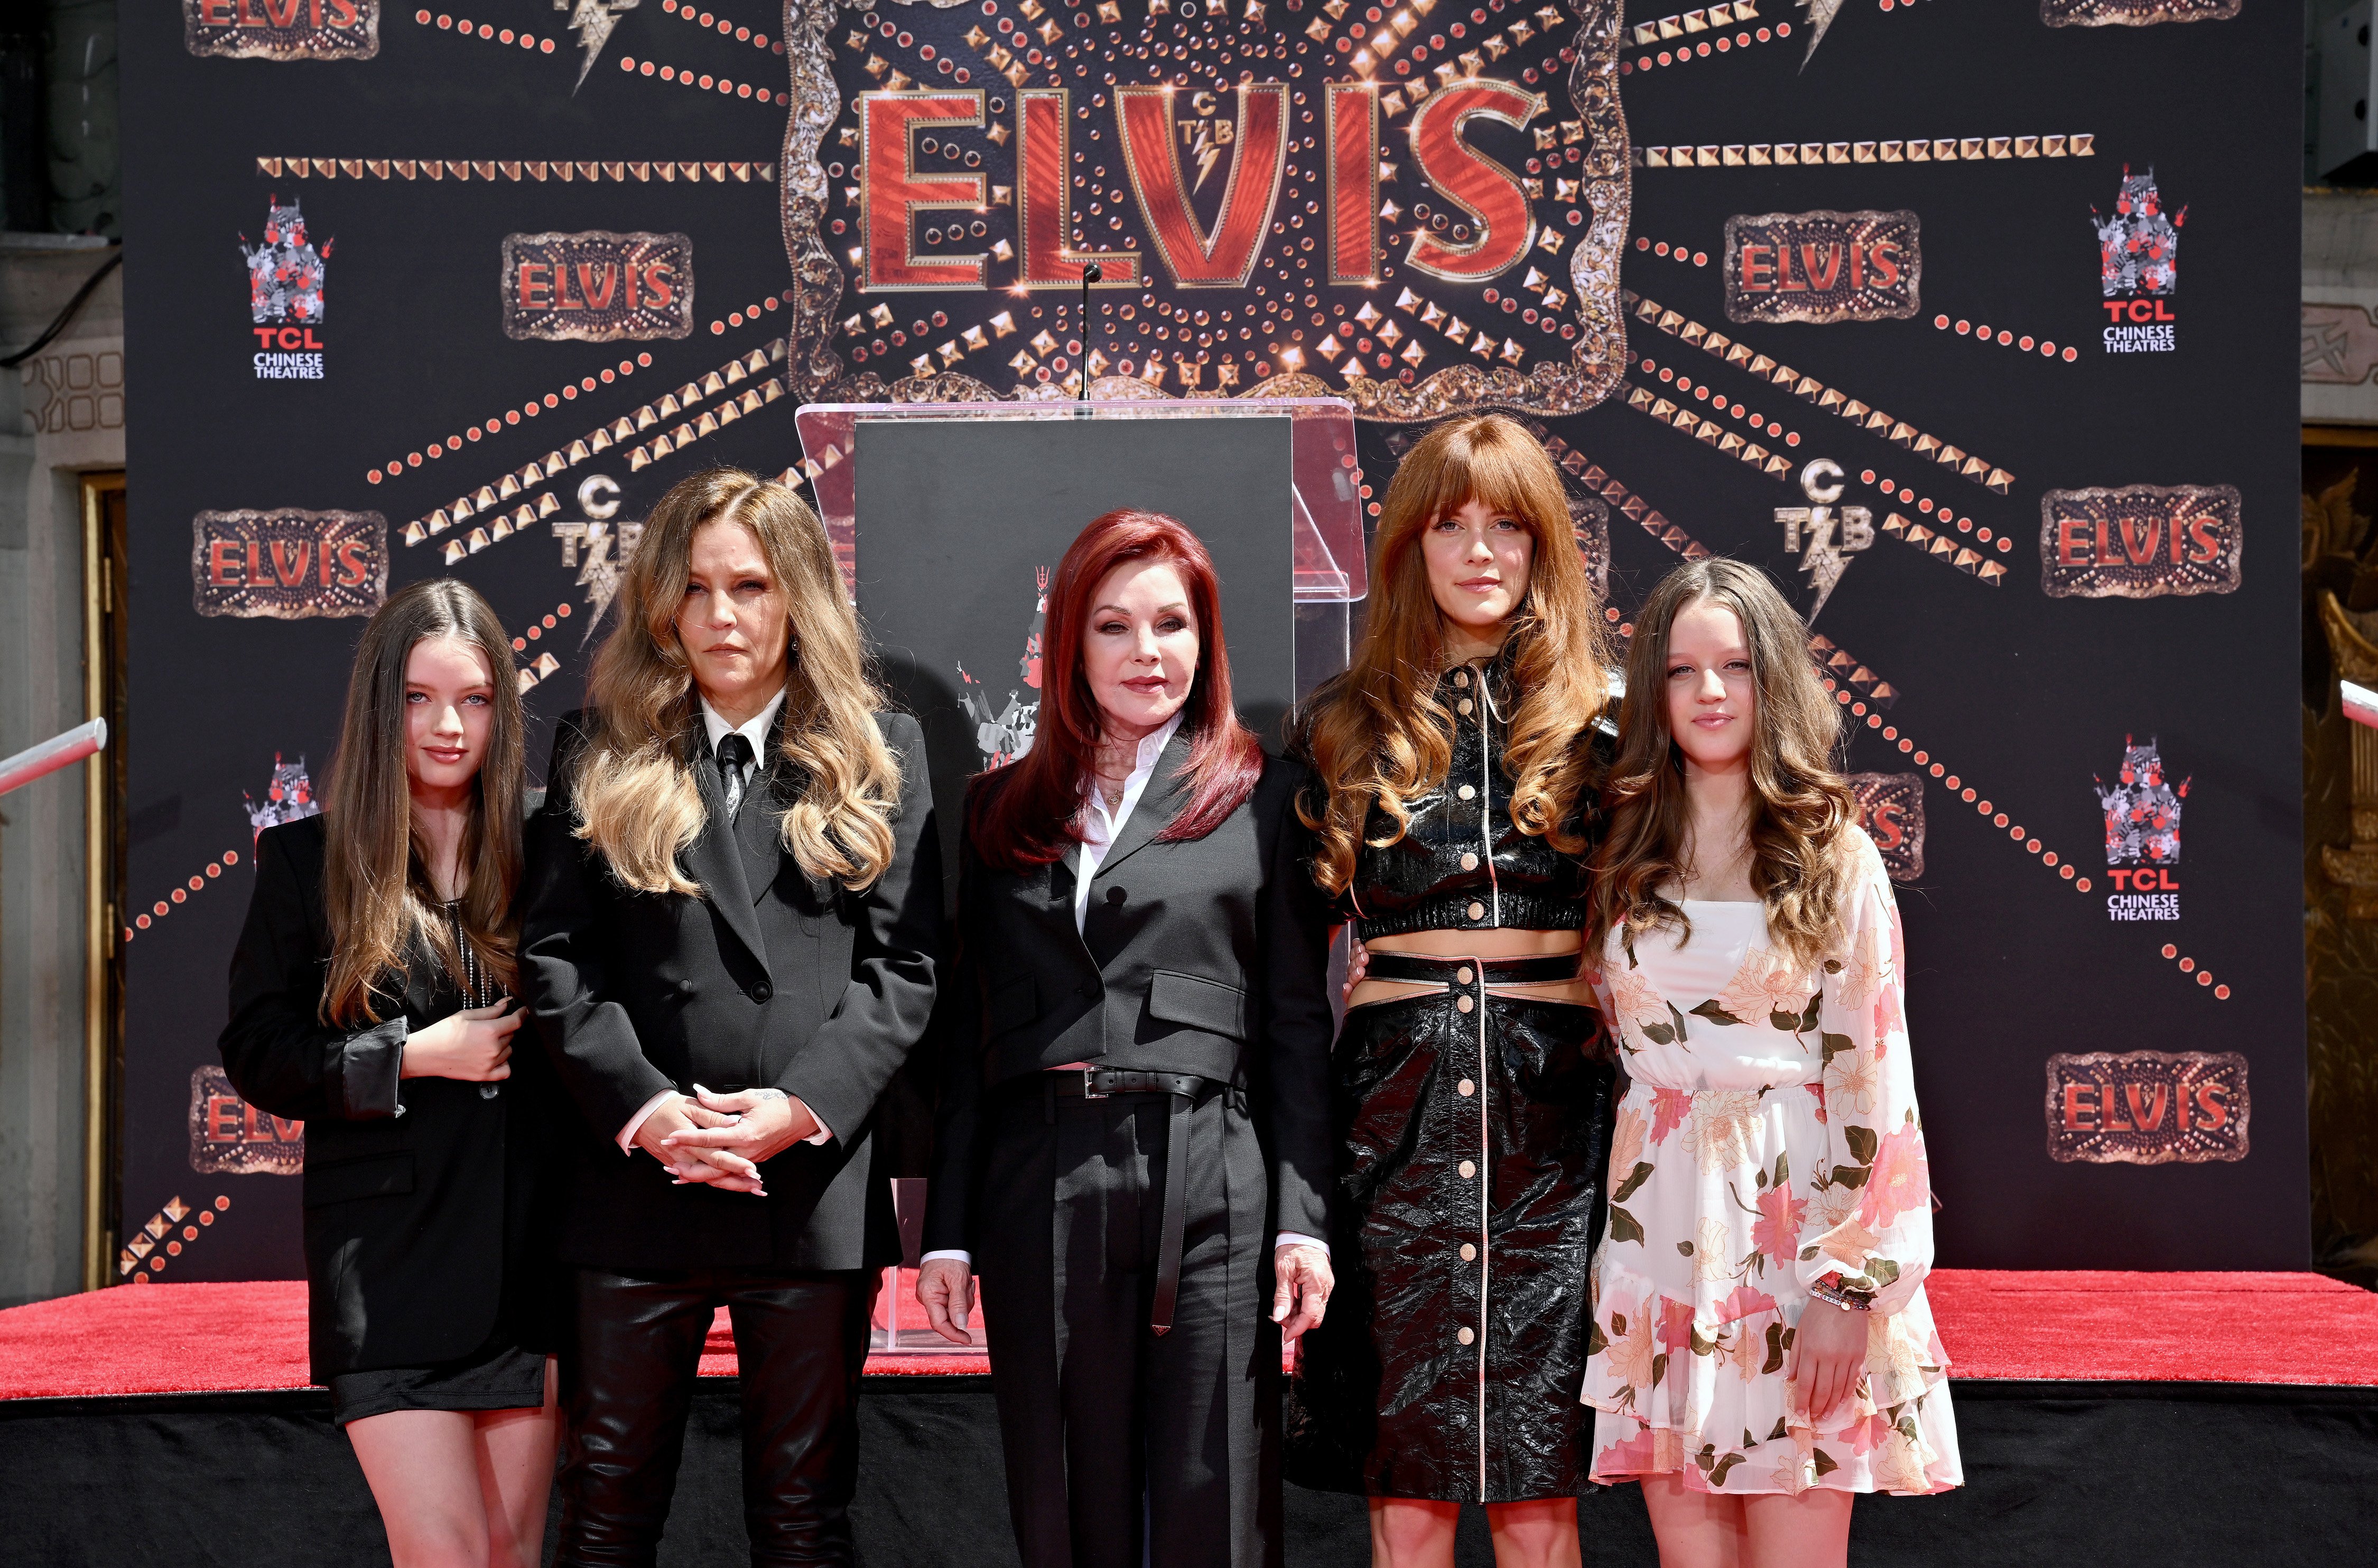 Harper Lockwood, Lisa Marie Presley, Priscilla Presley, Riley Keough, and Finley Lockwood at the Handprint Ceremony honoring Three Generations of Presley's in June 2022 in Hollywood, California. | Source: Getty Images